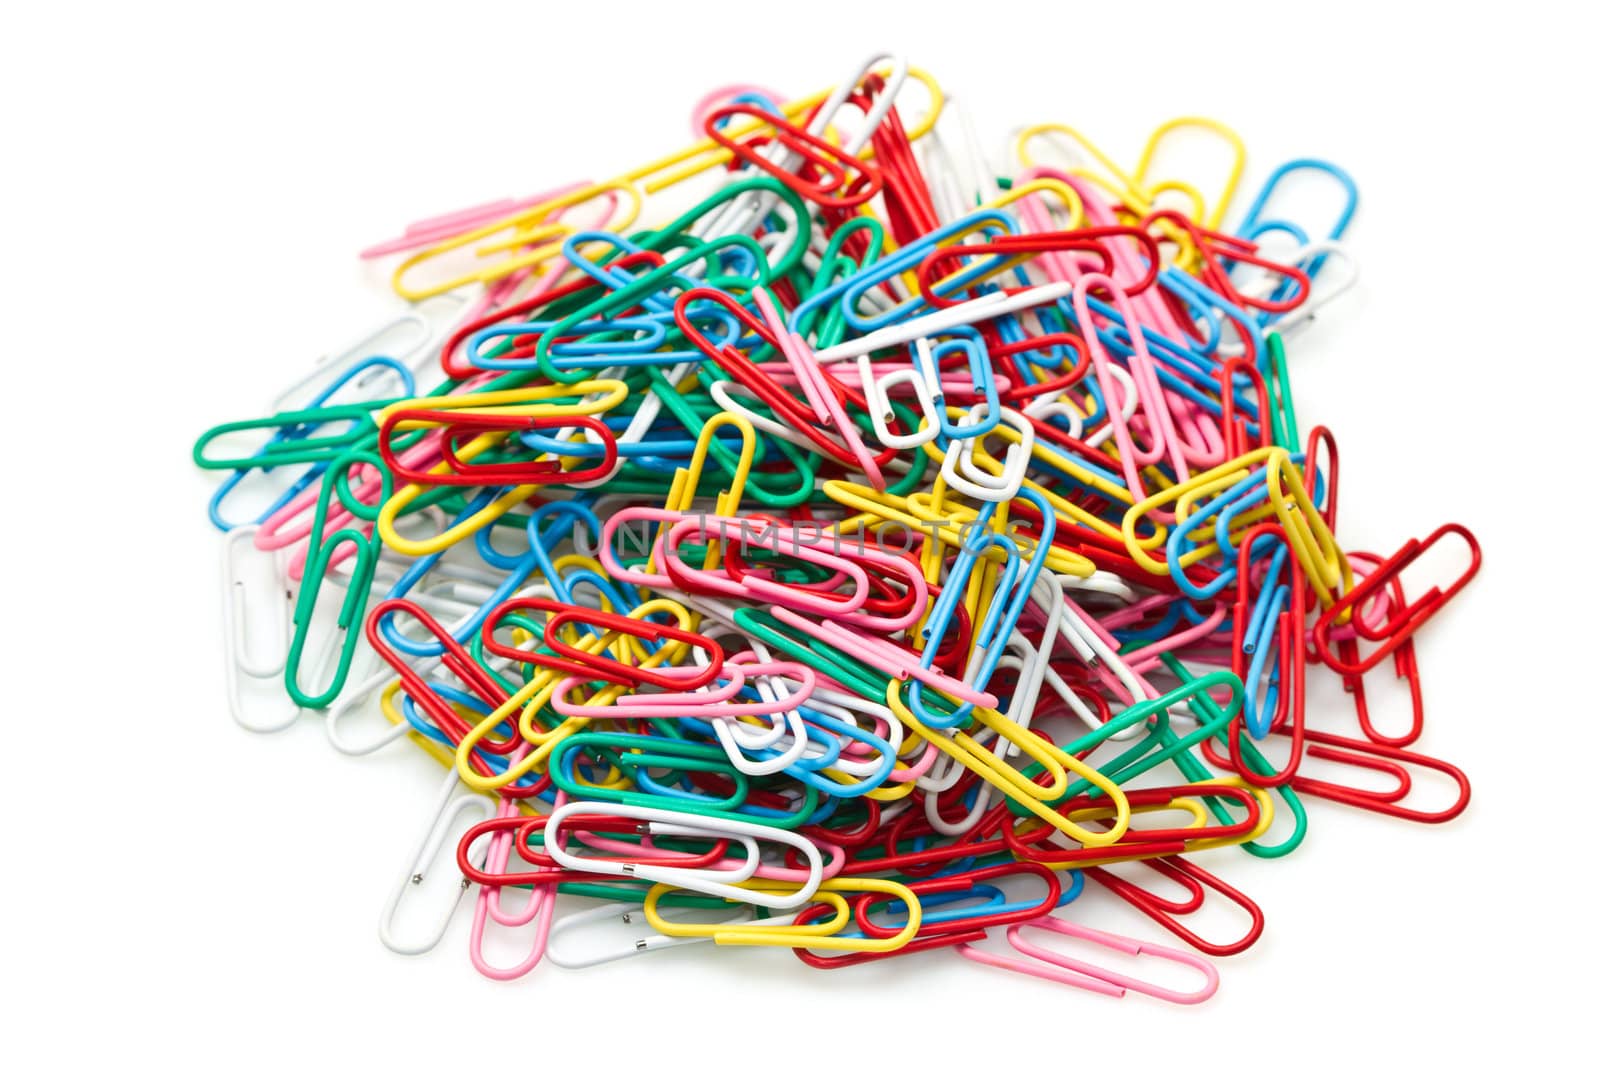 Multicolored paper clips by lsantilli